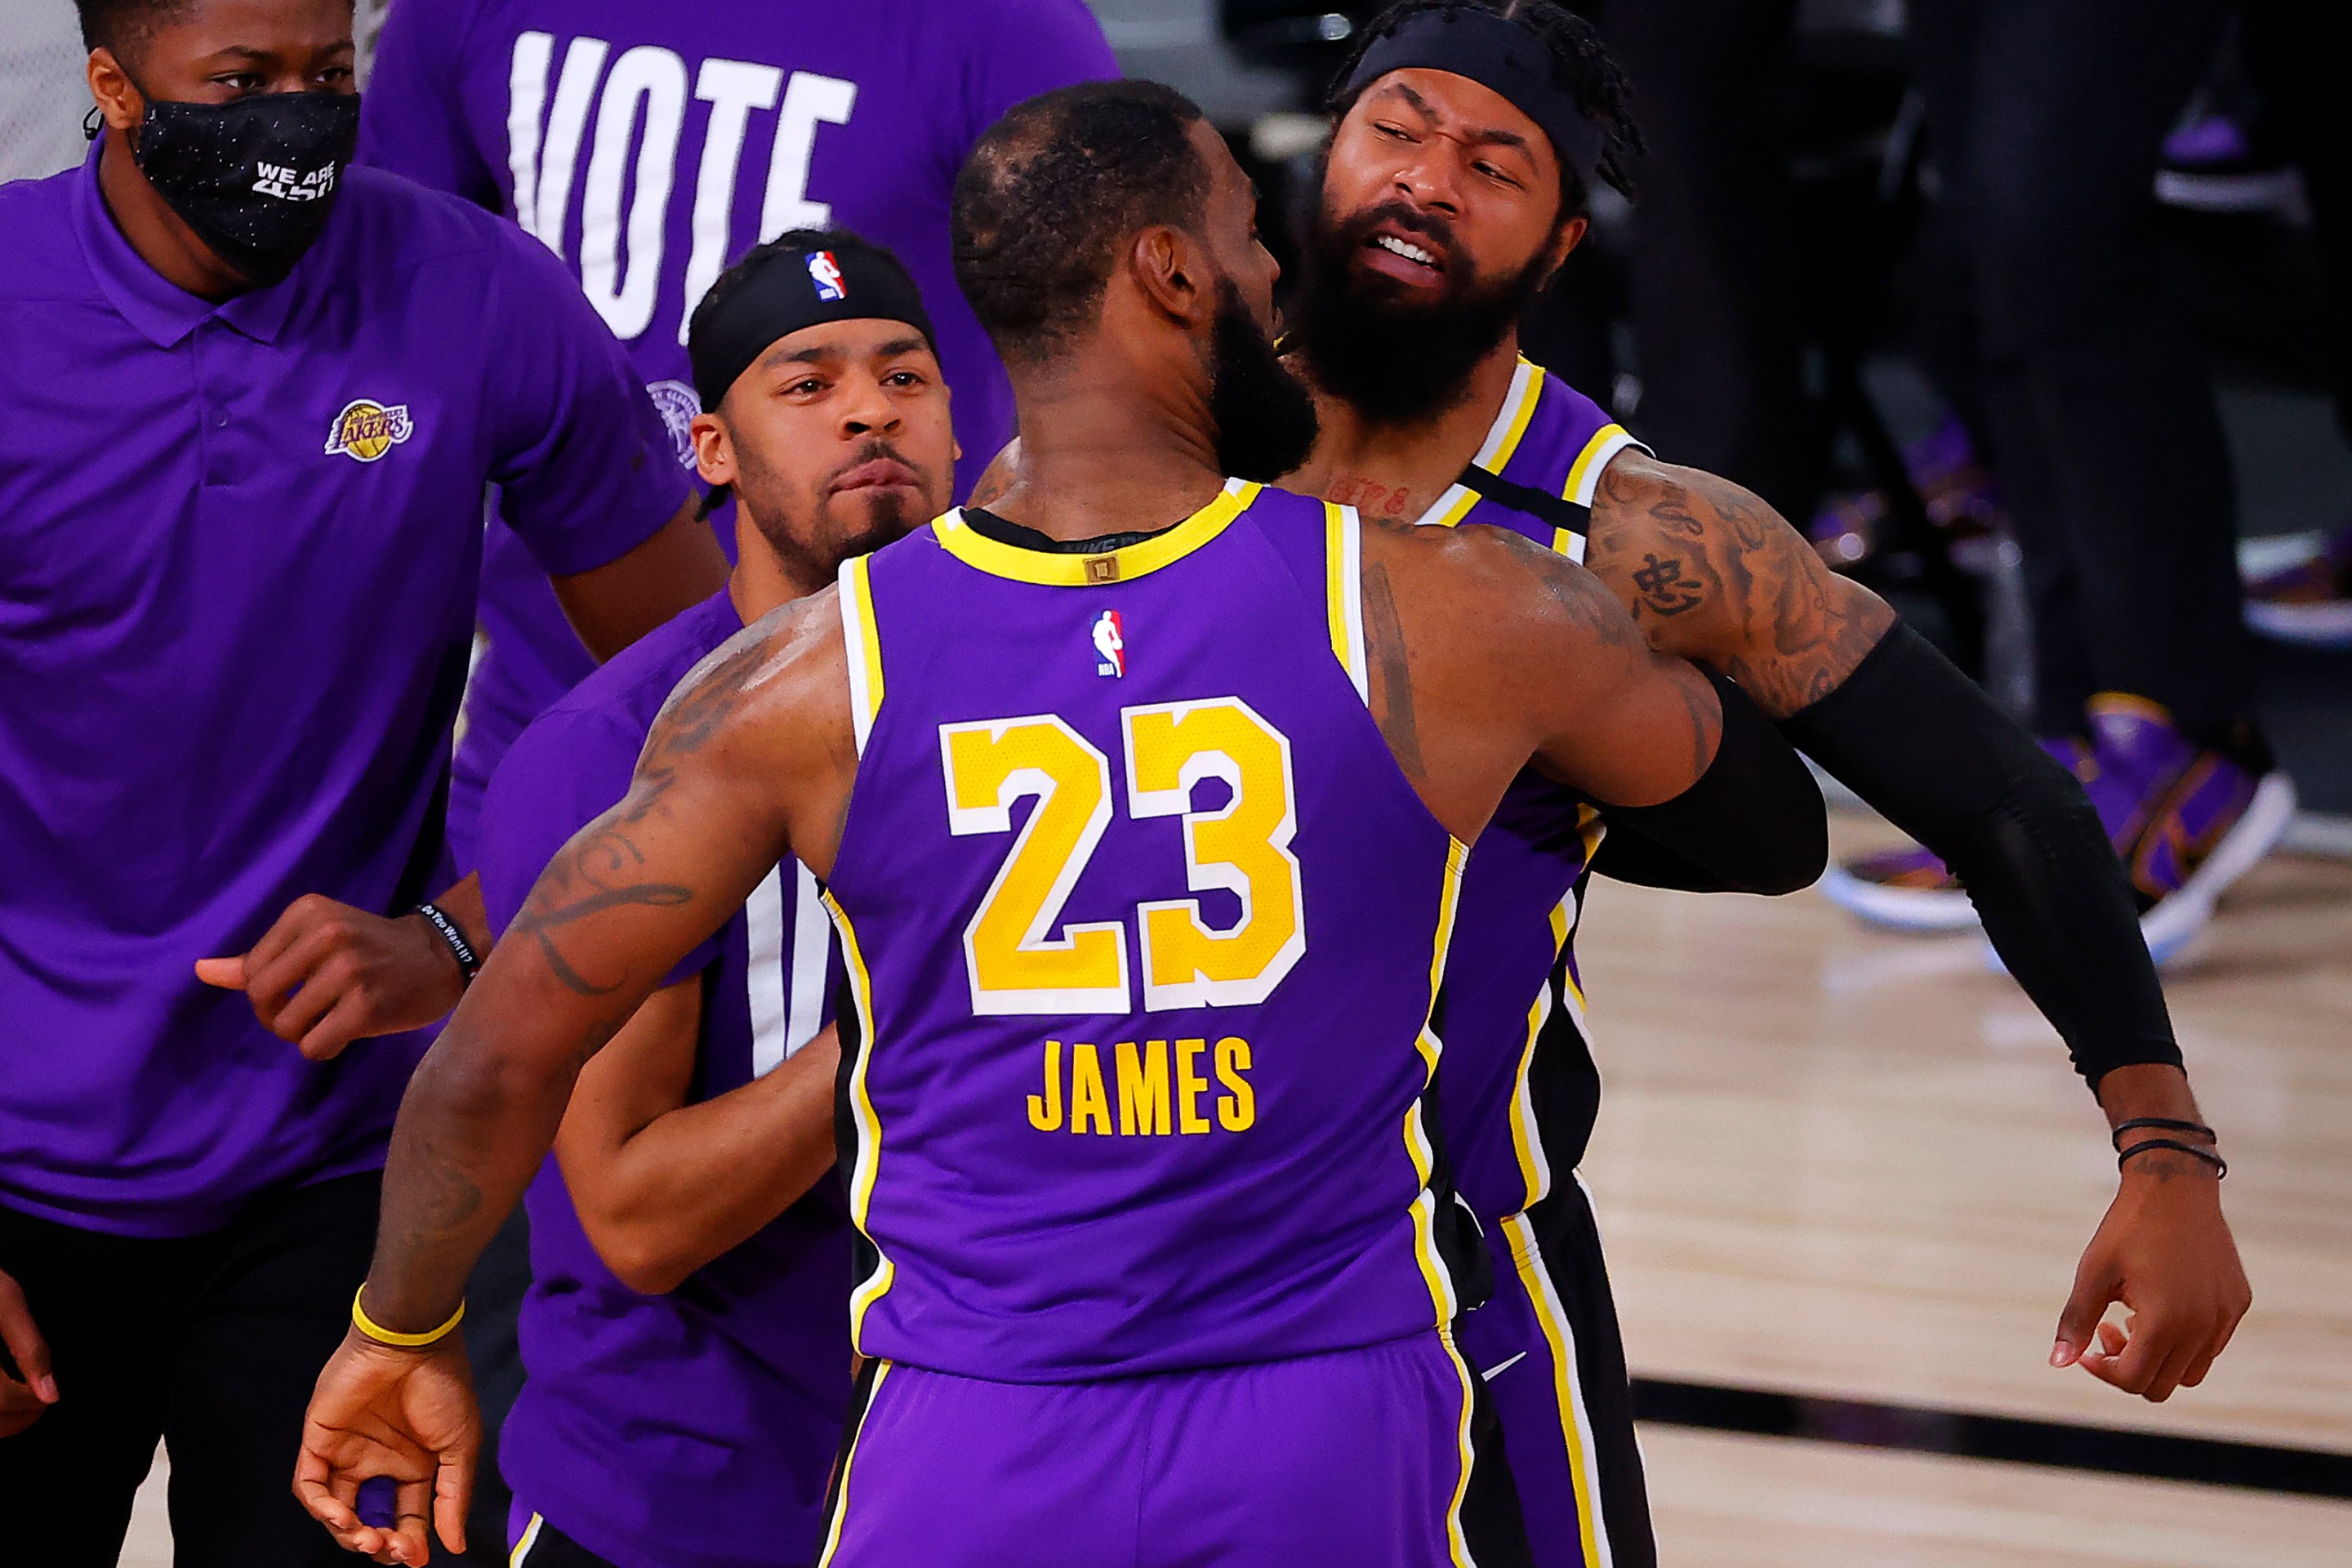 LeBron James and Markieff Morris of the Lakers chest-bump during a victorious Game 5 of the Western Conference Finals.